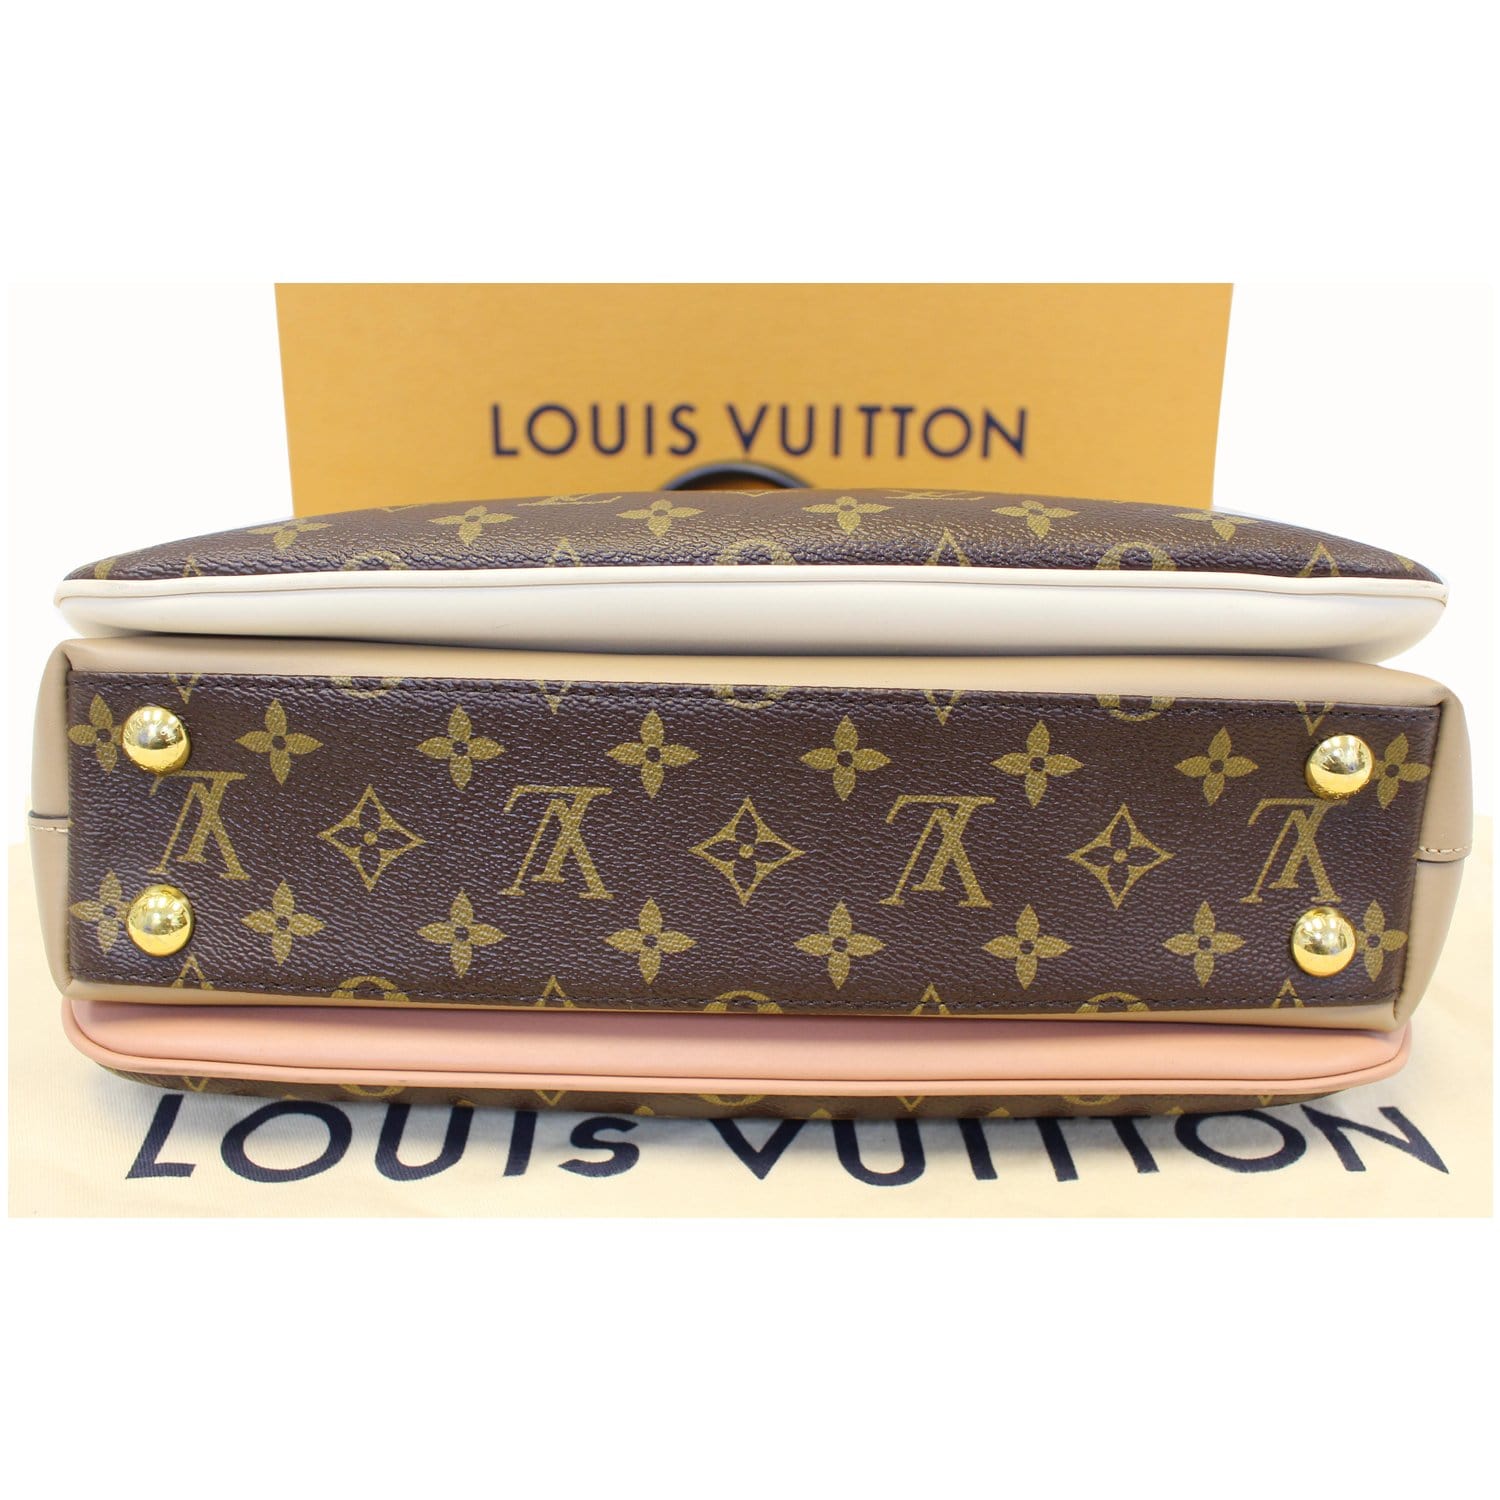 Mille Feuille inspired by Louis Vuitton